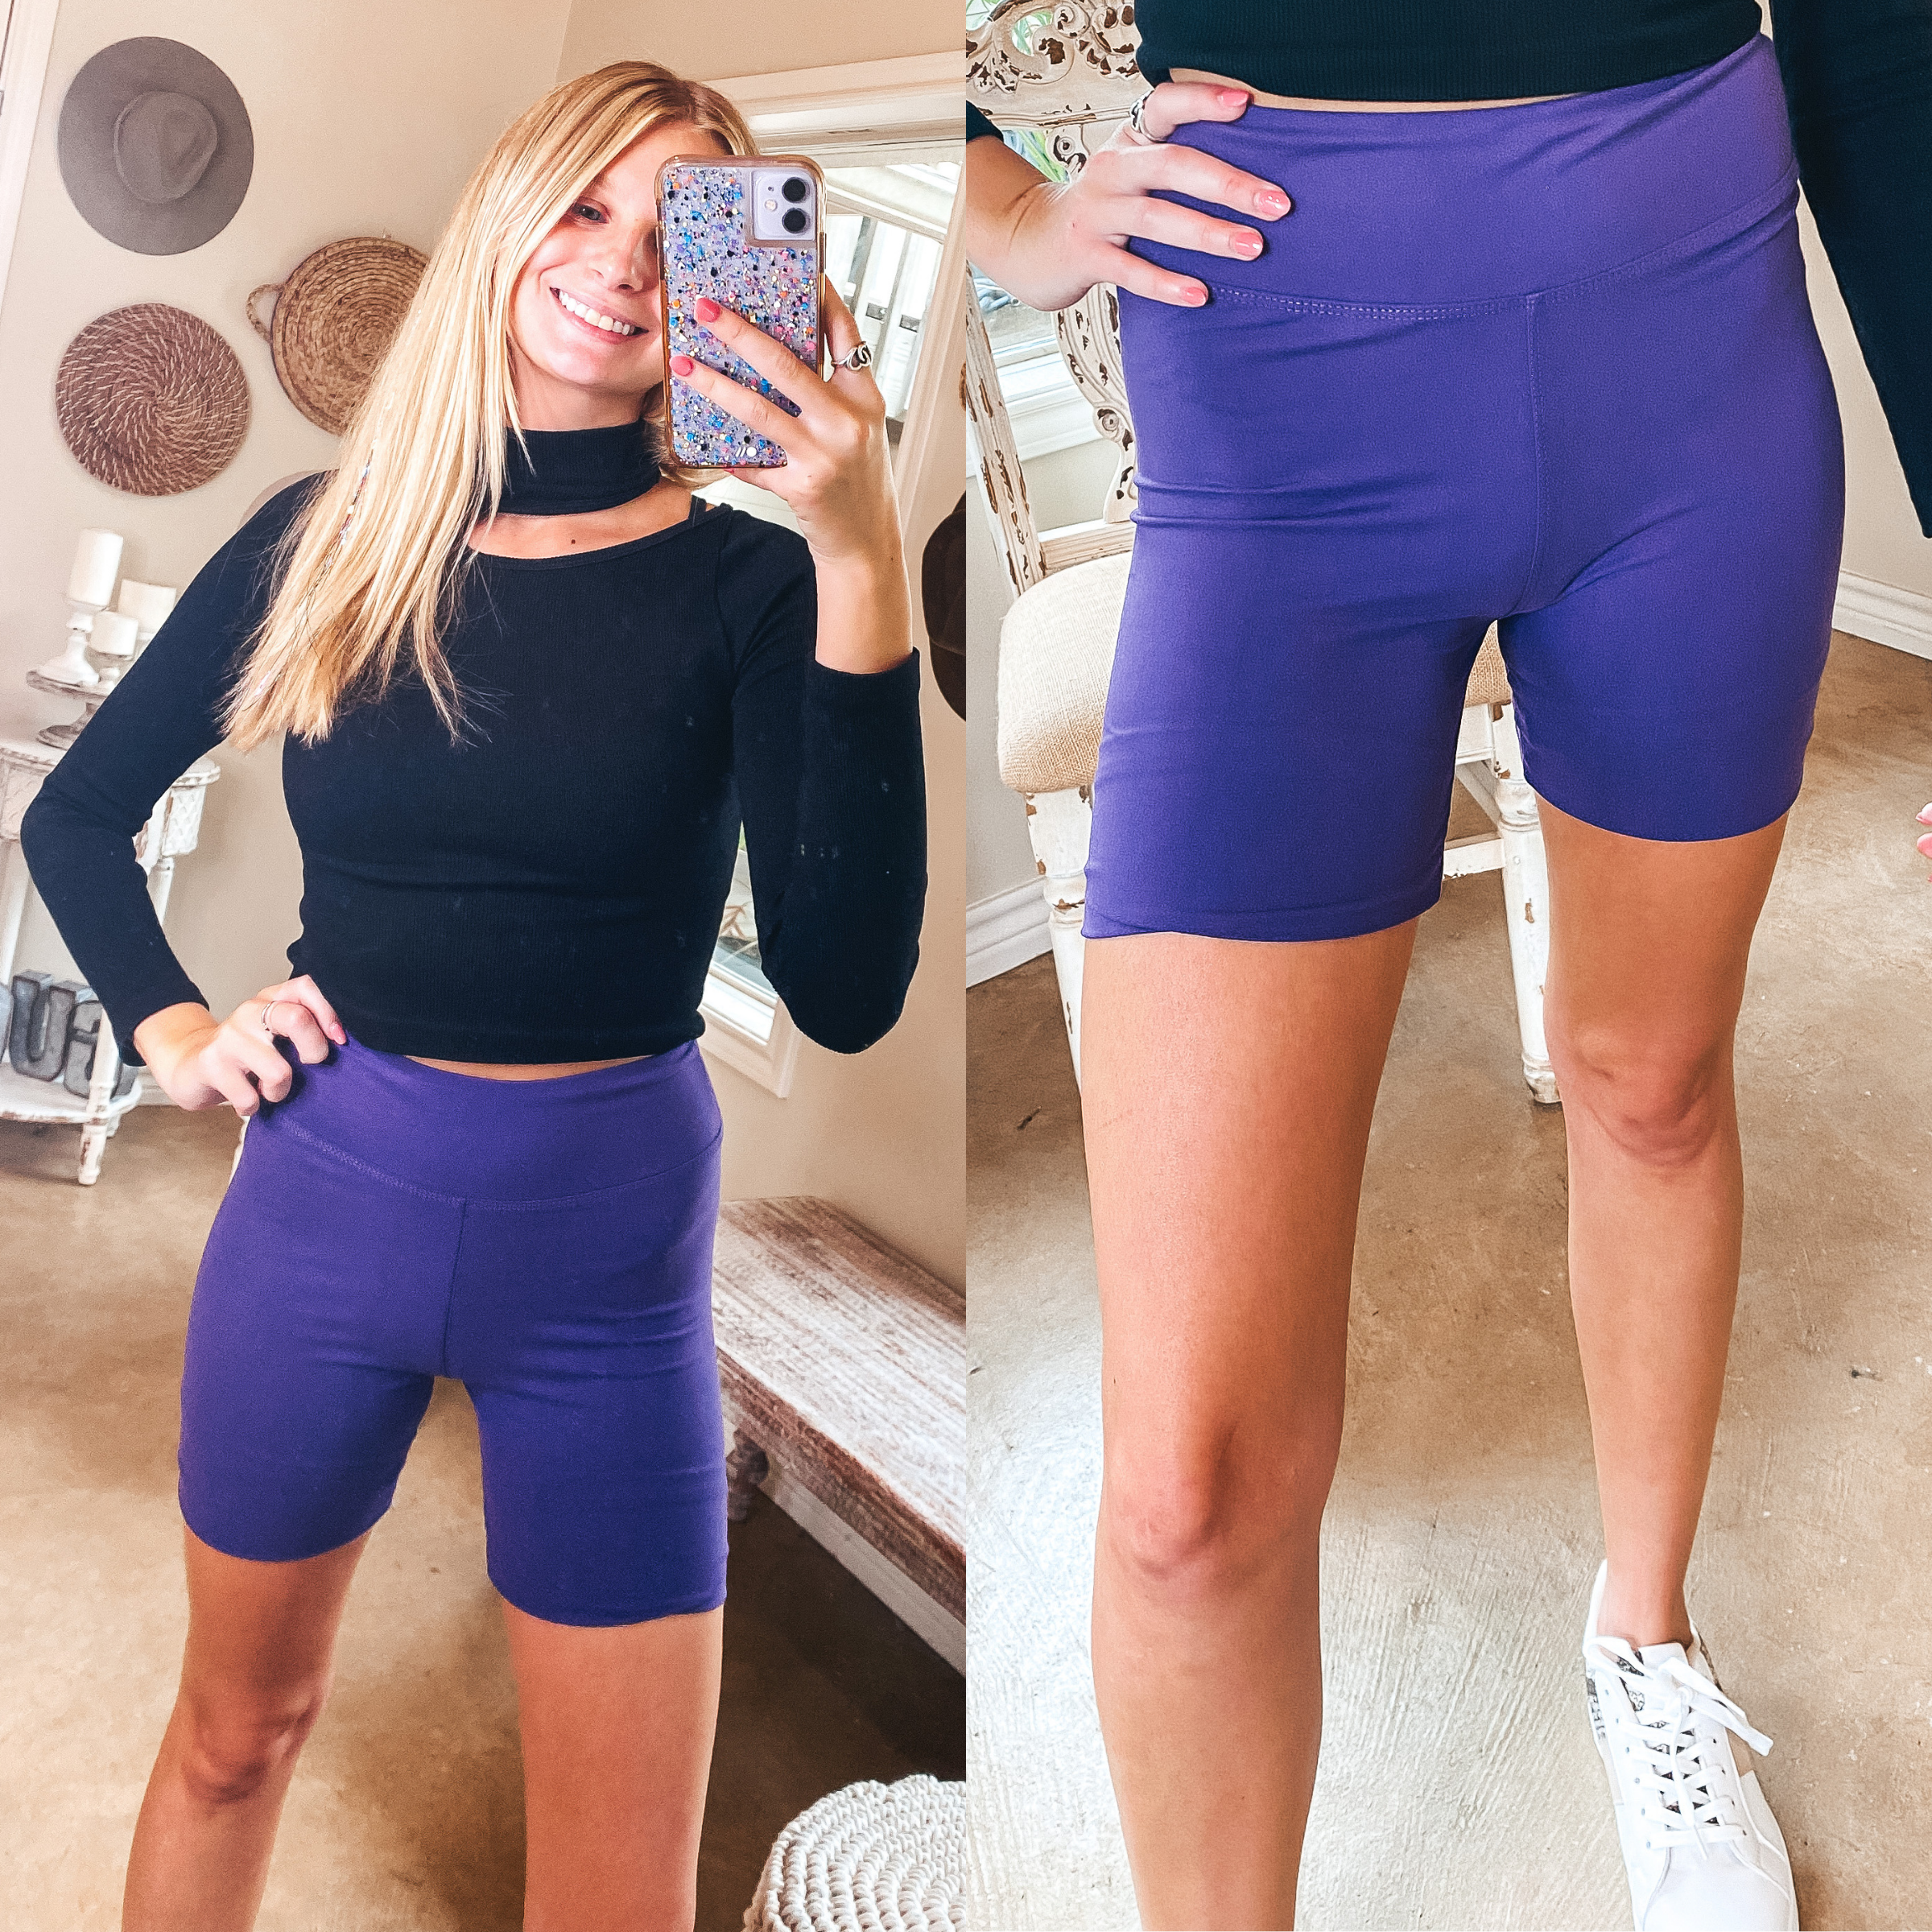 Finish Strong High Waist Biker Shorts in Purple - Giddy Up Glamour Boutique